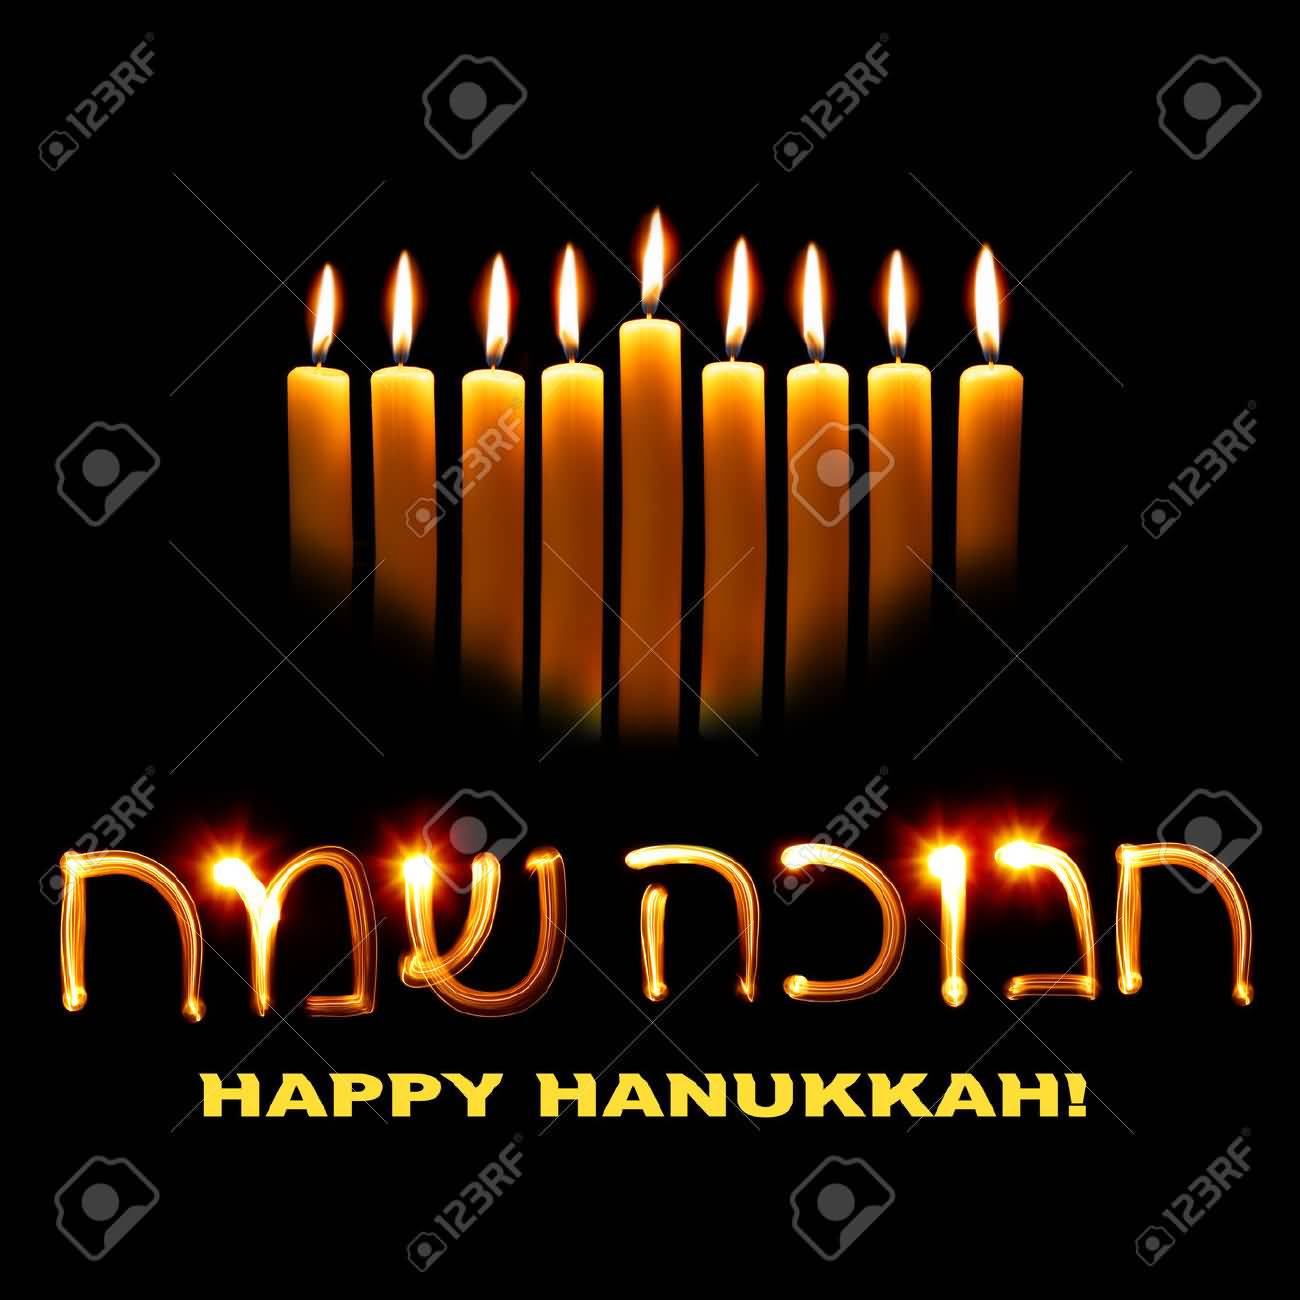 Happy Hanukkah Lightning Candles Picture